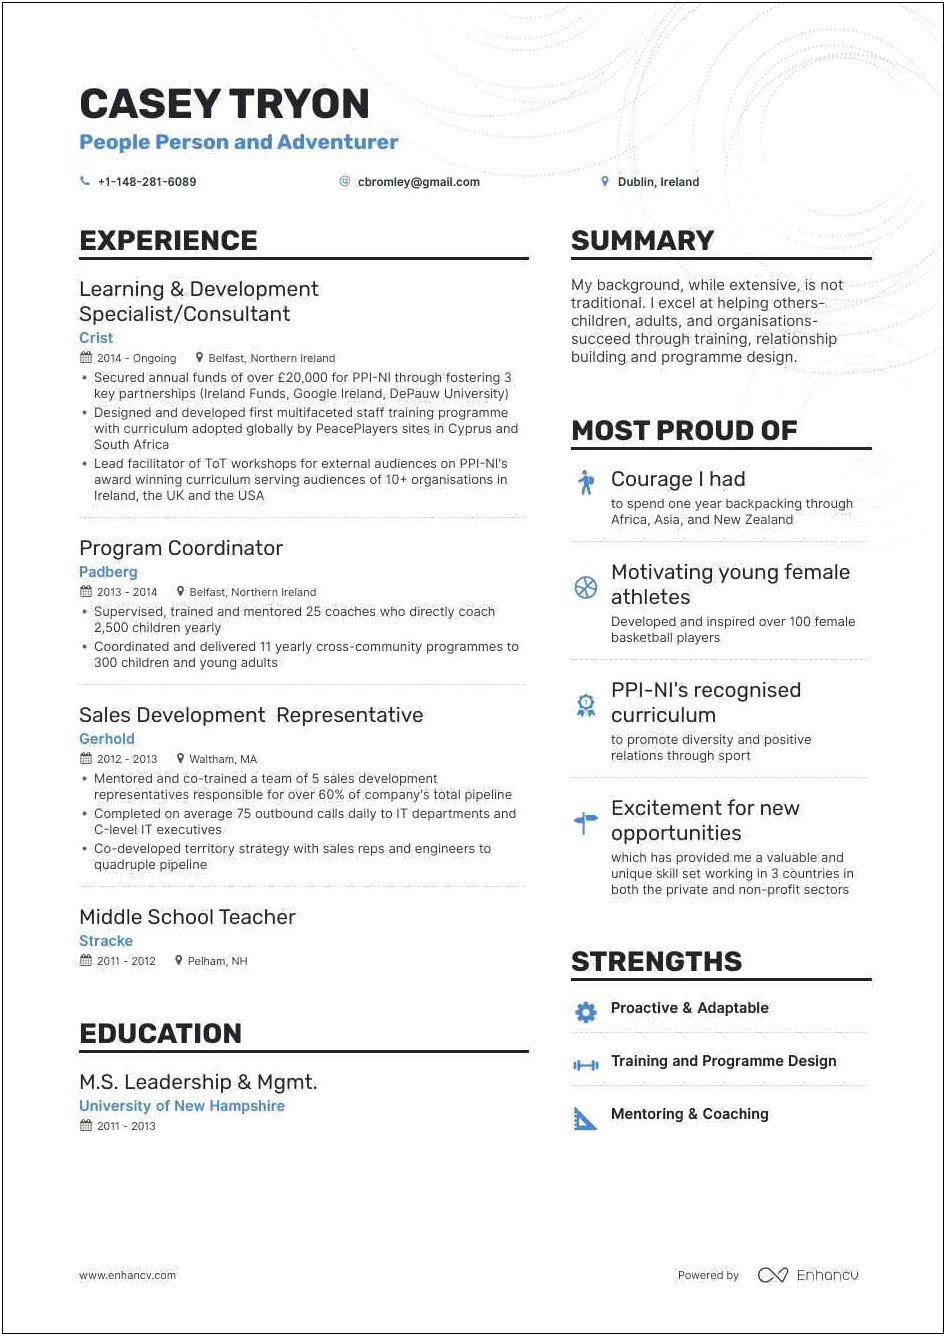 Sample Resume For Human Resource Specialist